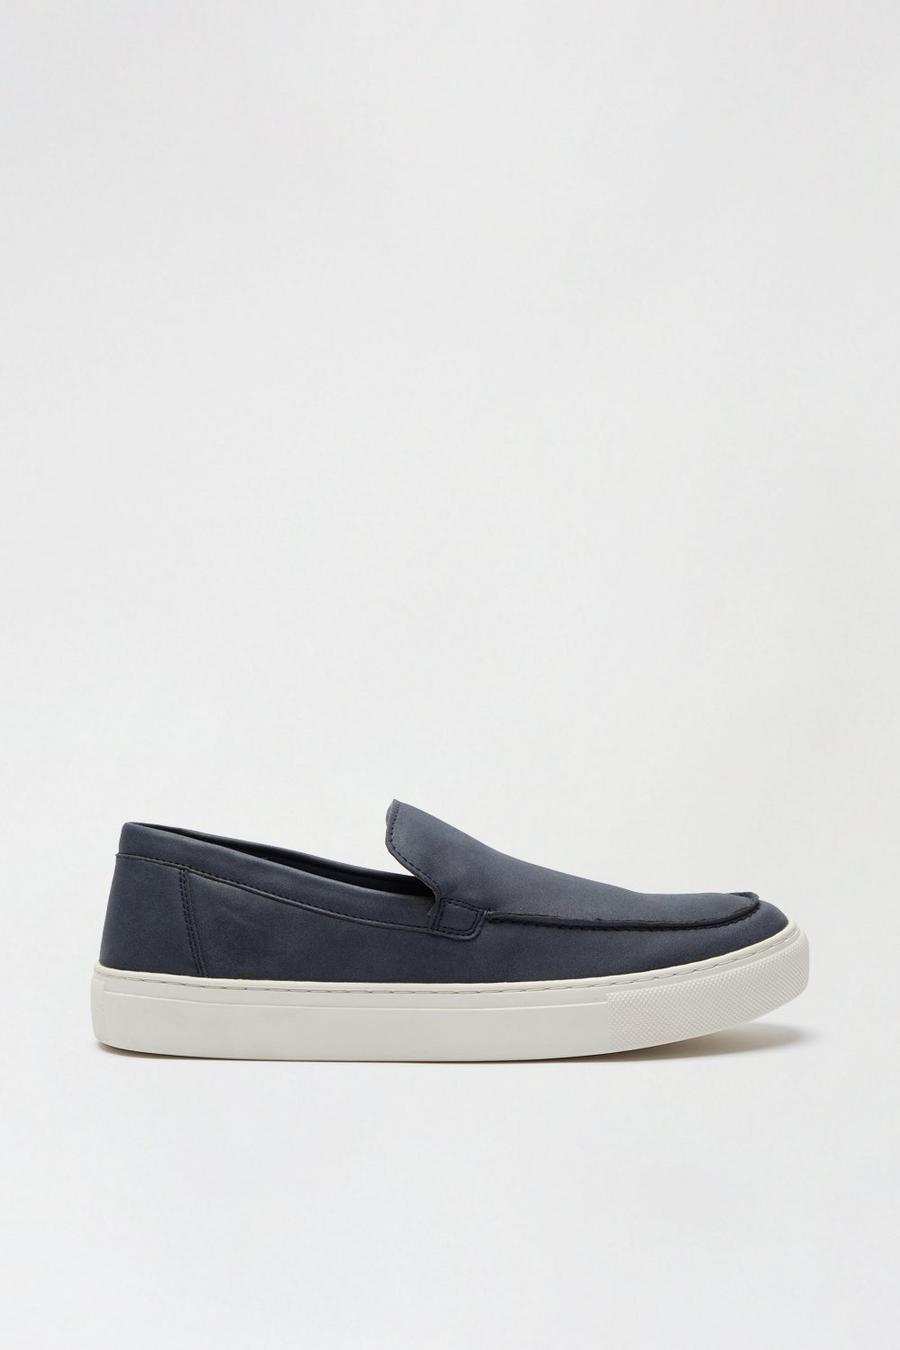 Suede Look Slip On Shoes With Band